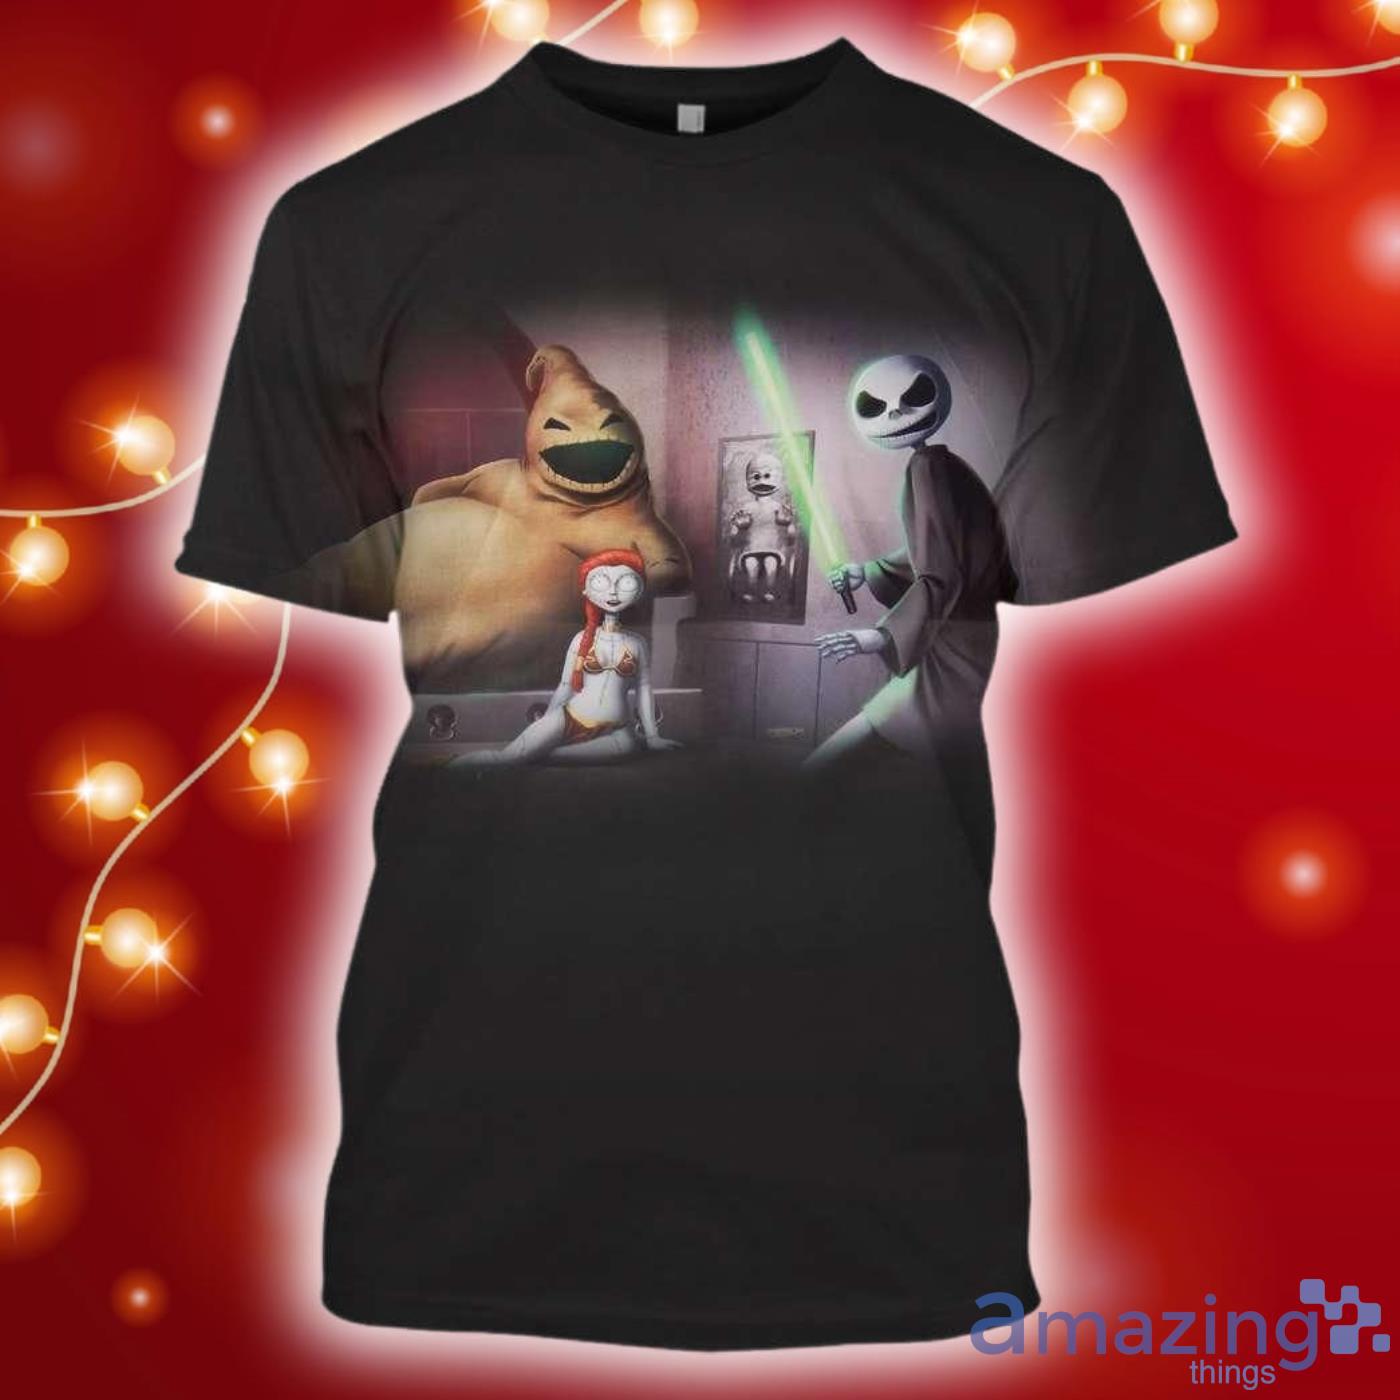 The Nightmare Before Christmas Star Wars All Over Print 3D Shirt Product Photo 1